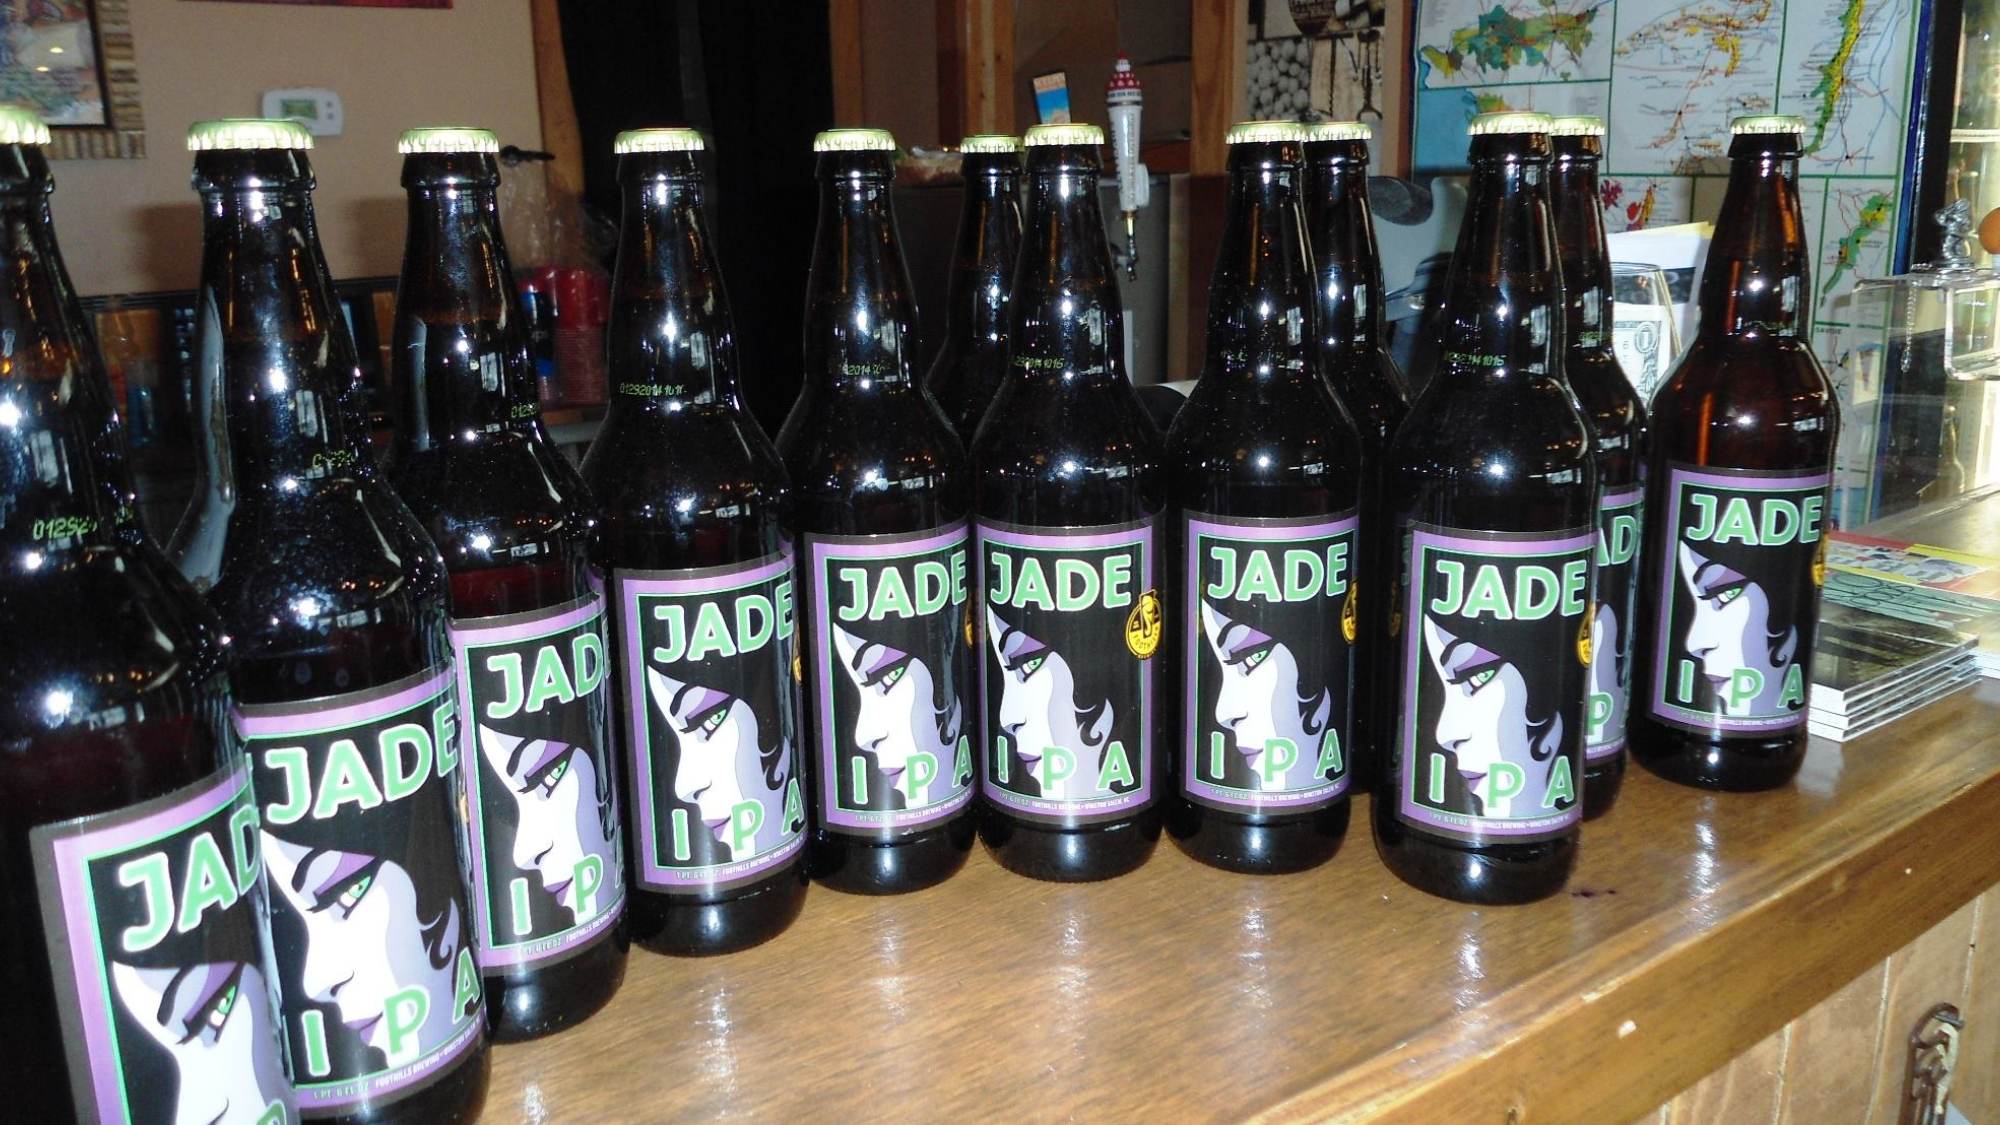 Review Of Jade IPA from Foothills Brewing